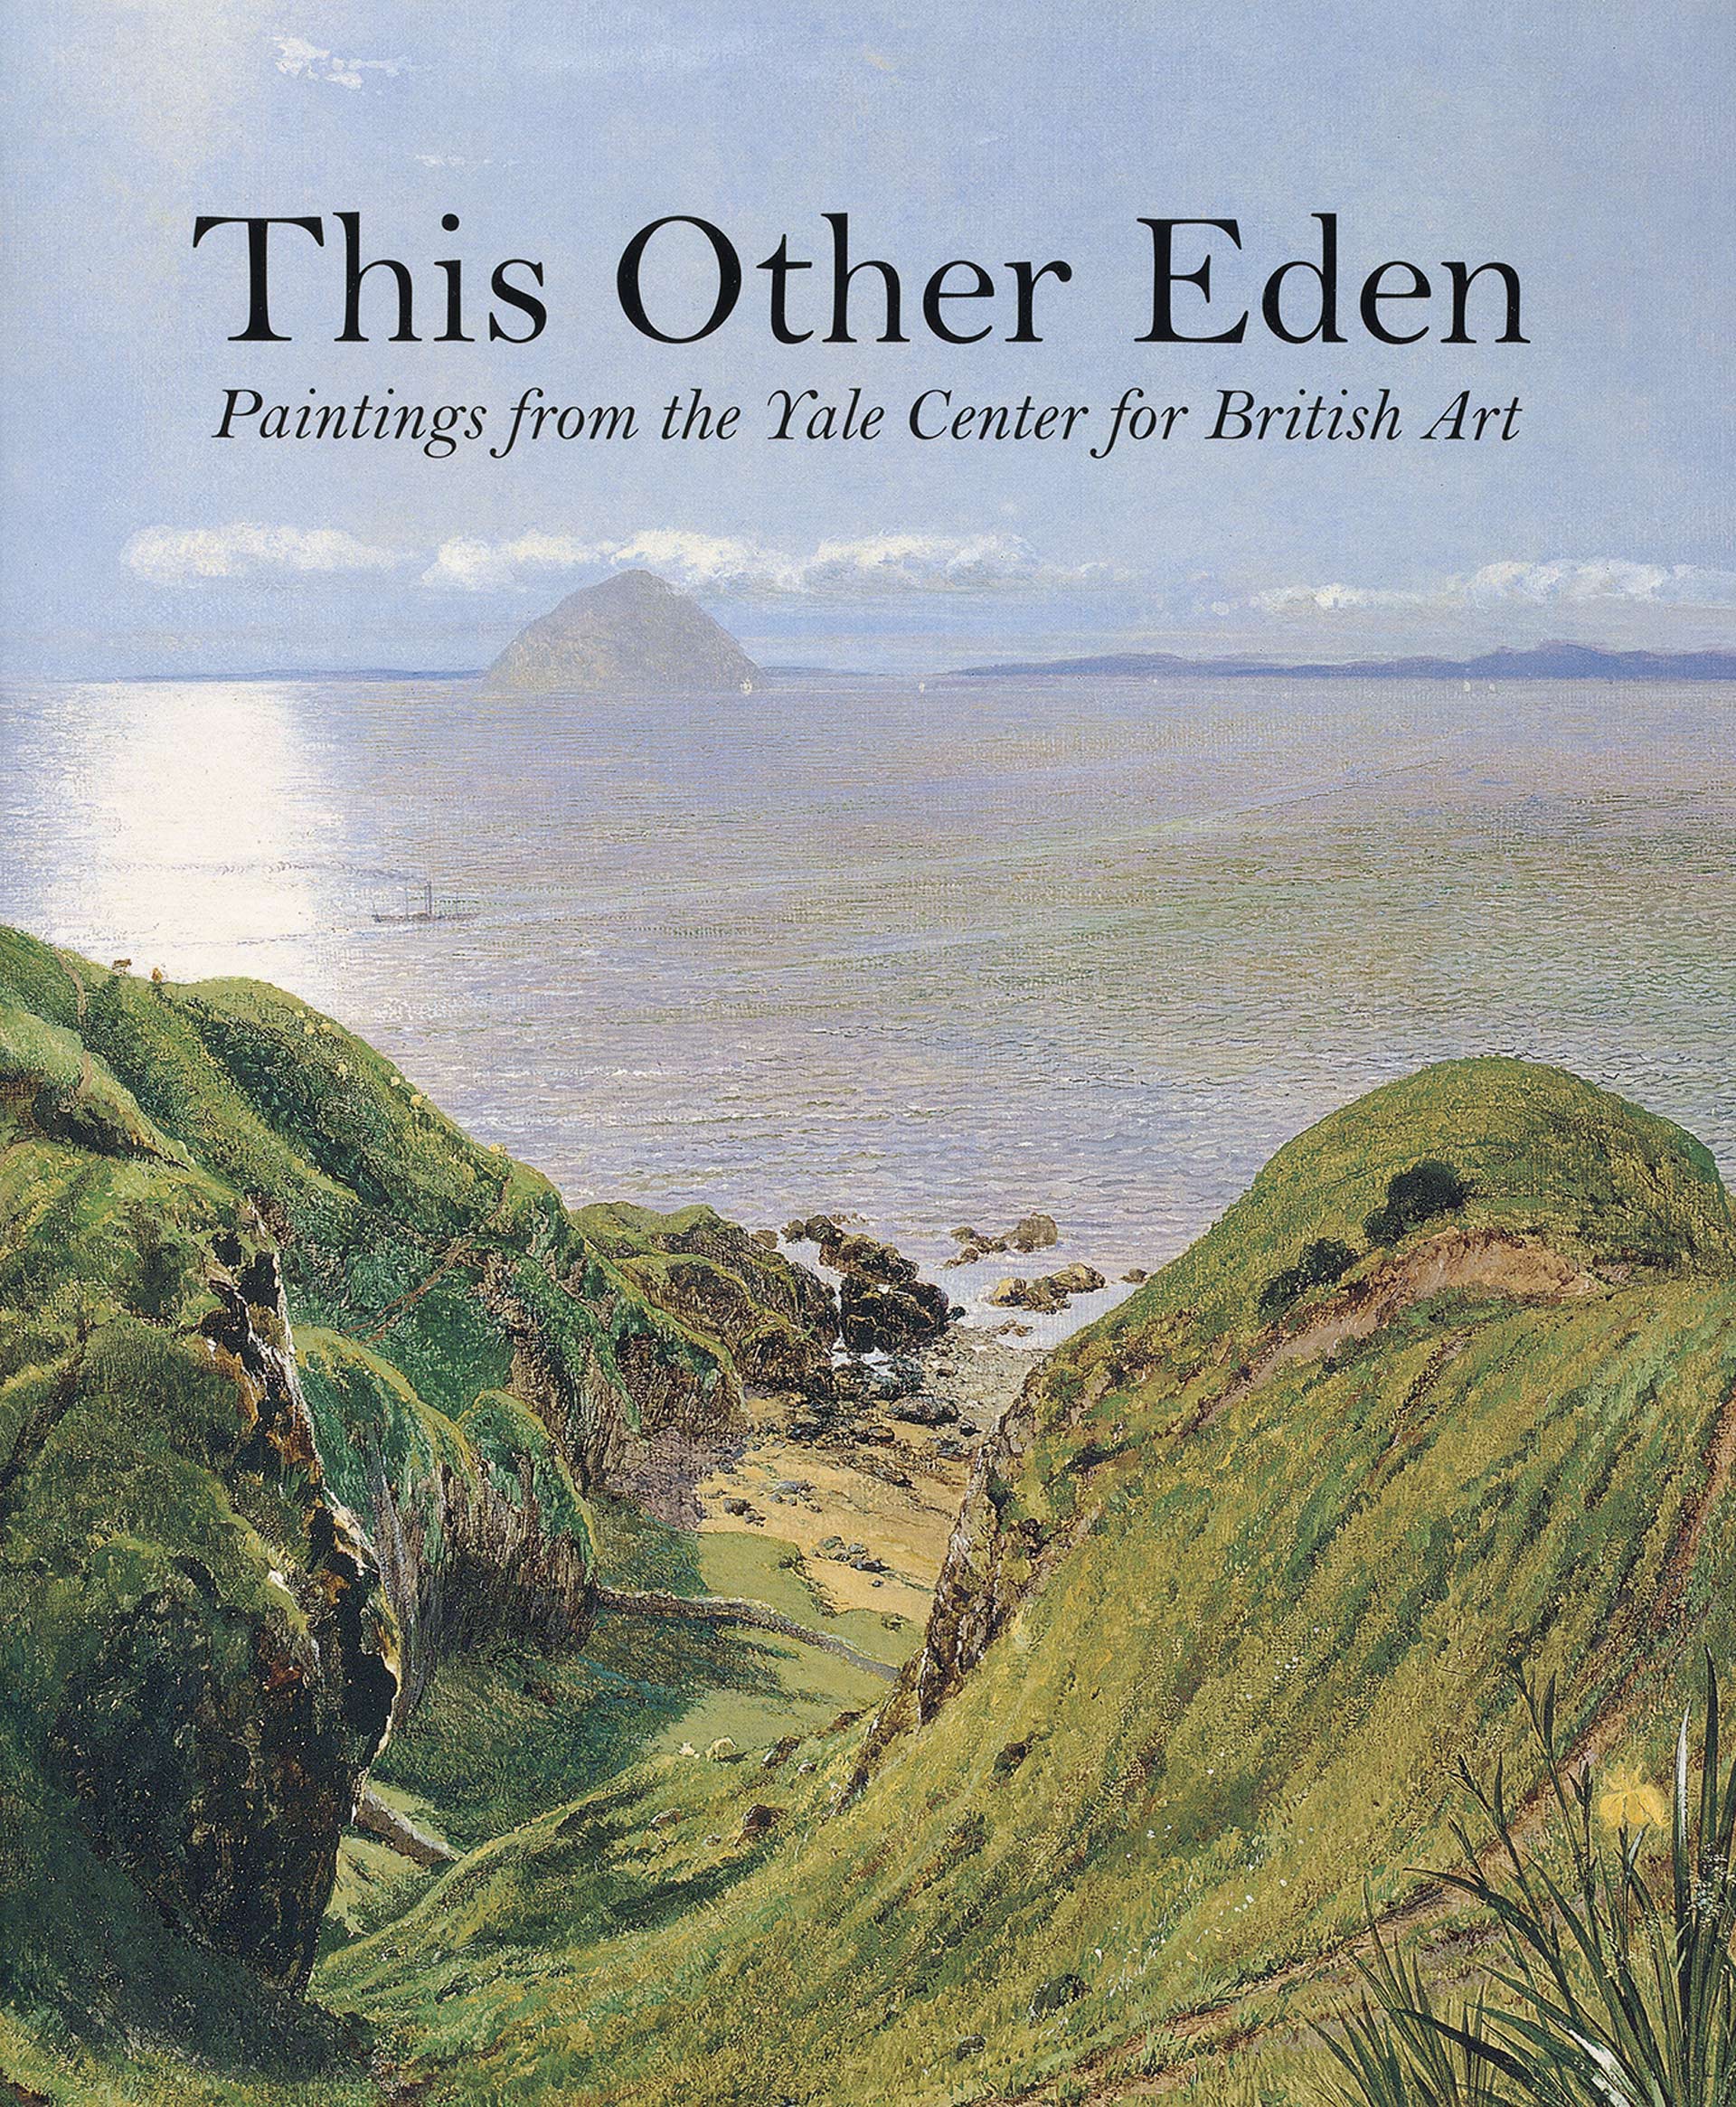 This Other Eden: Paintings from the Yale Center for British Art